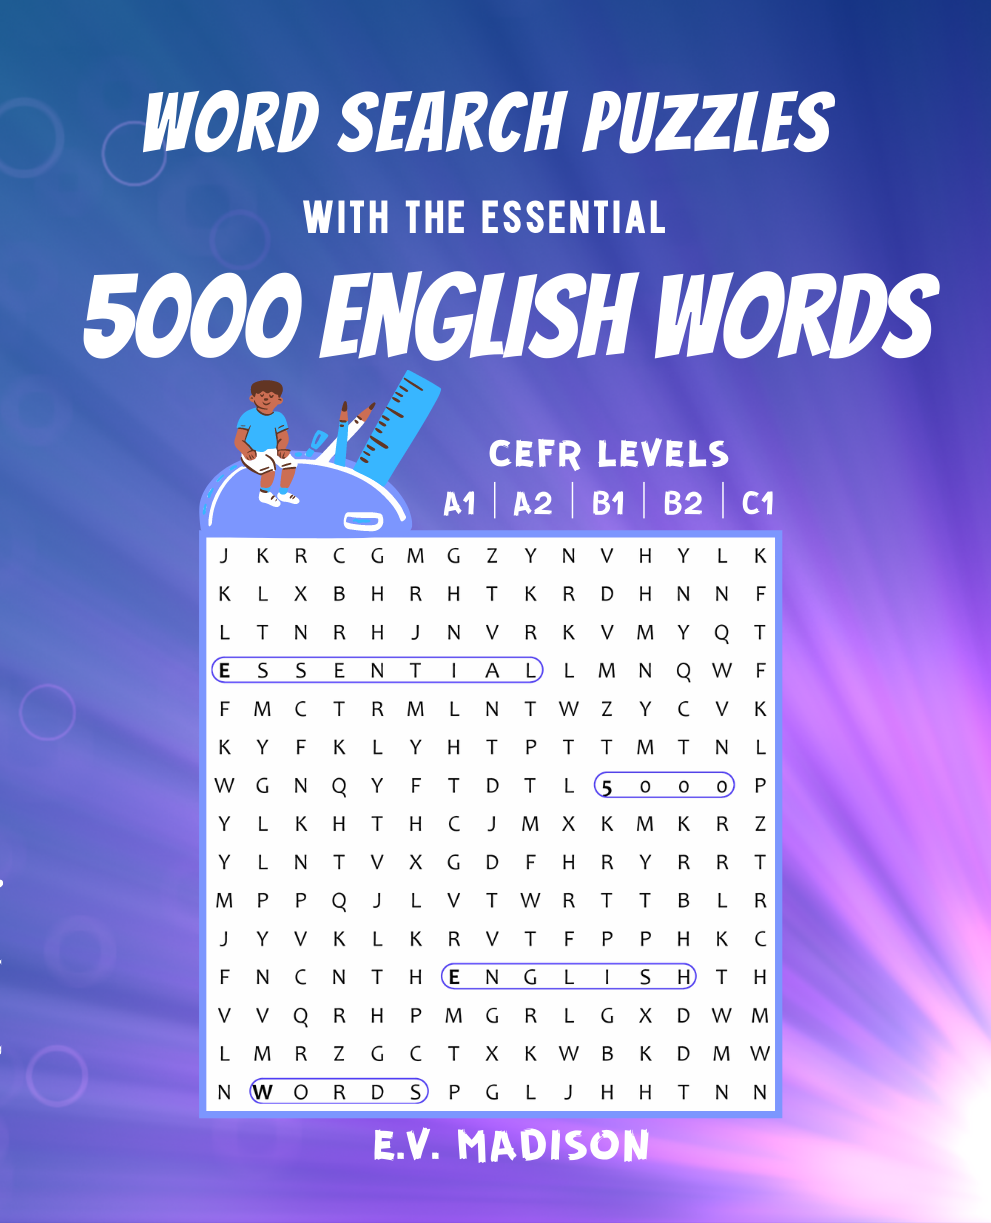 Word Search Puzzles with the Essential 5000 English Words